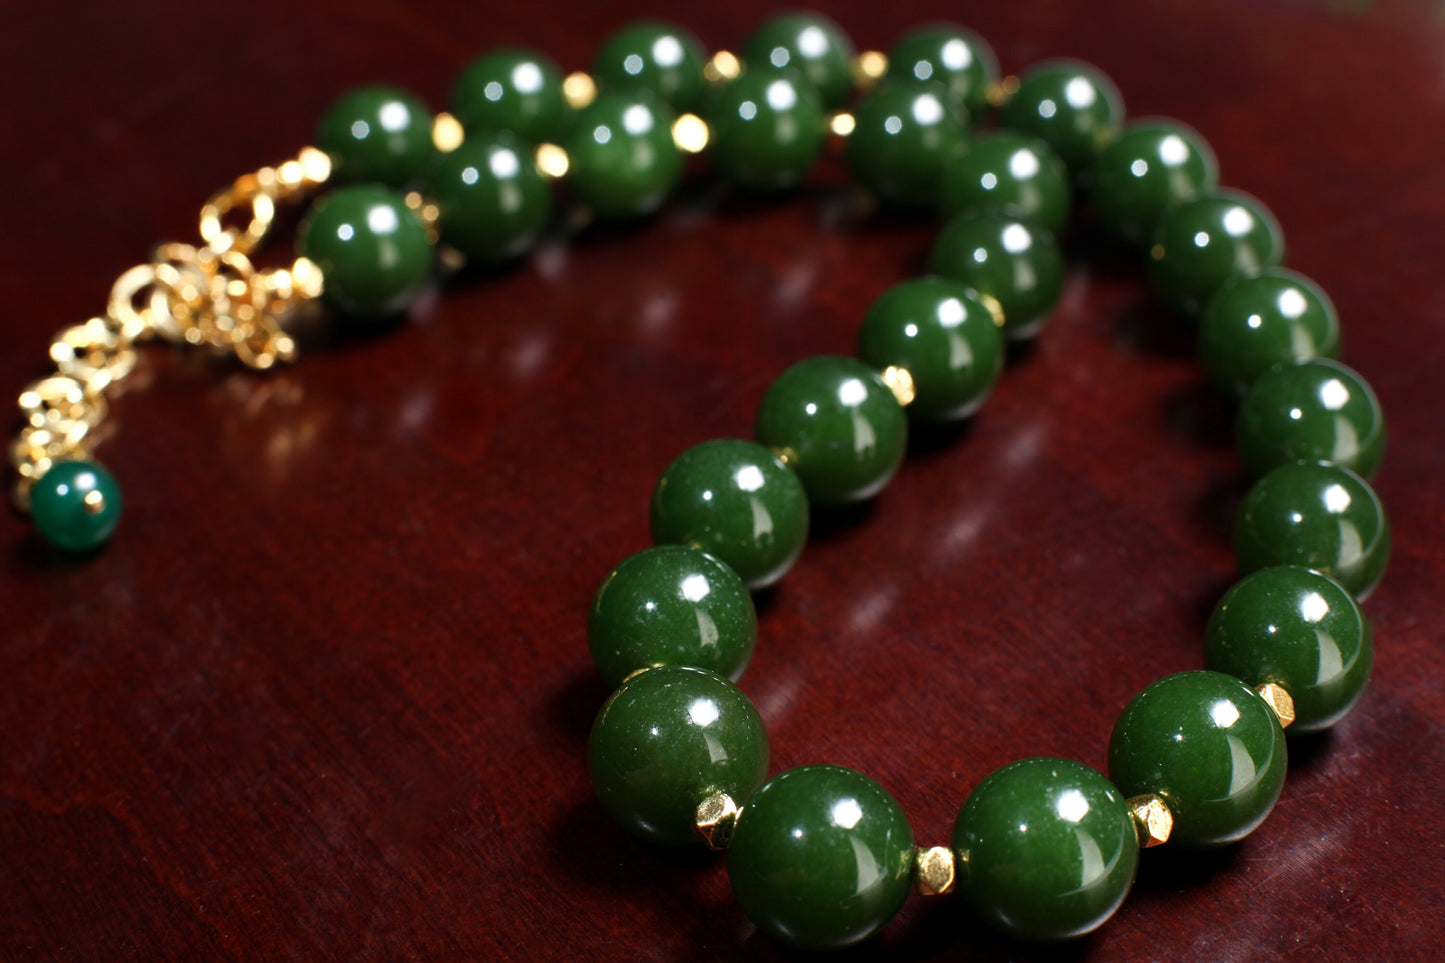 Canadian Nephrite Jade 12mm 18"Gold Necklace with 2" Extension Chain. High Quality Natural Jade smooth polished Bead. Gift for Mom